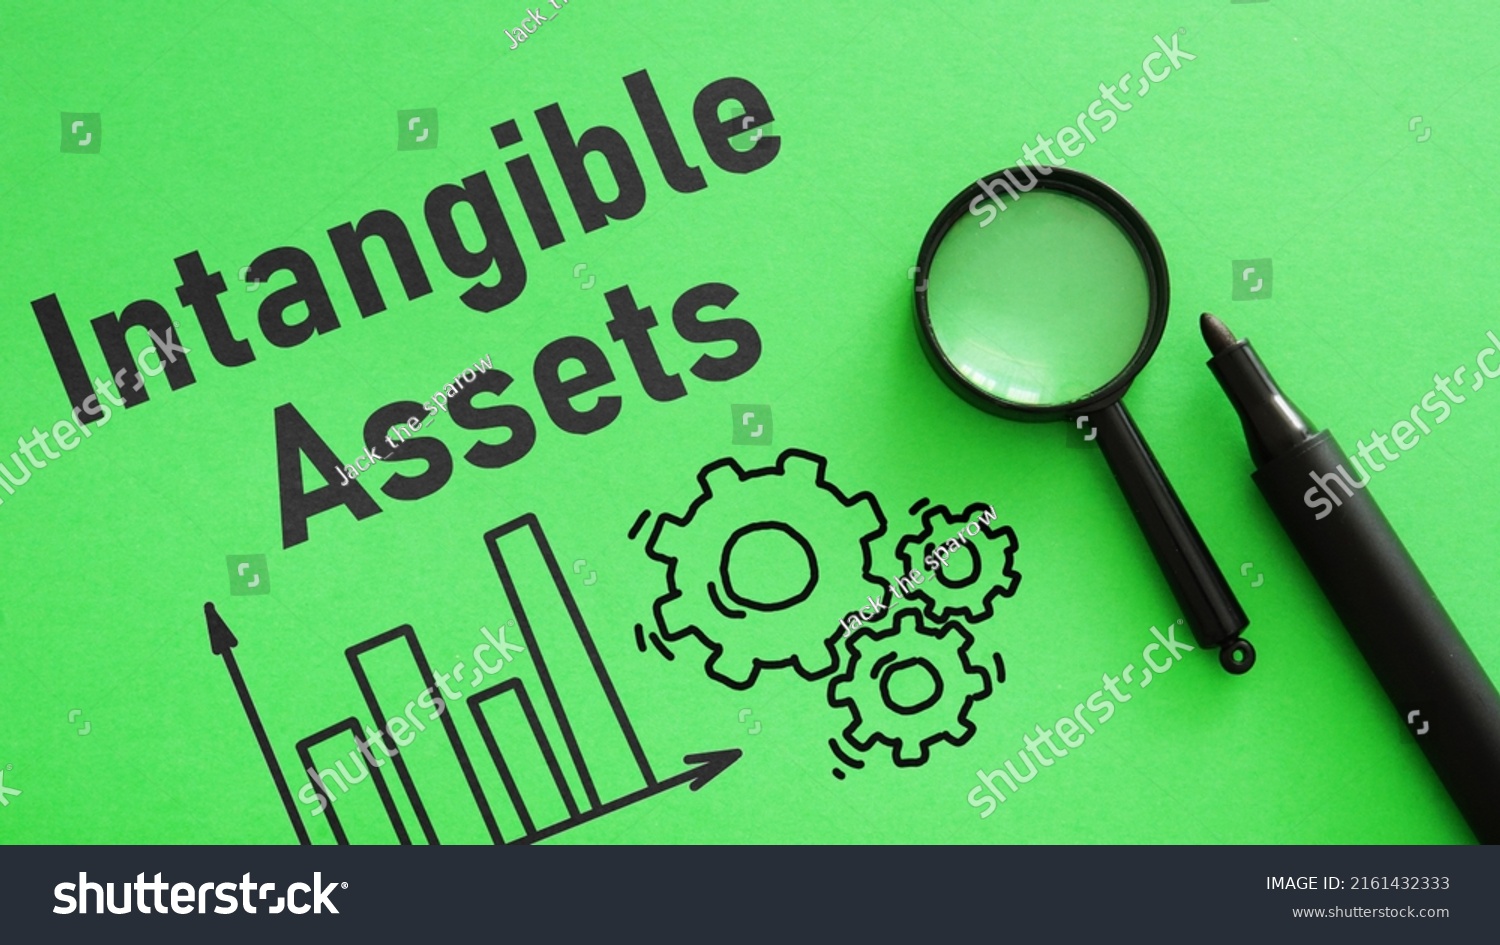 Intangible assets are shown using a text #2161432333